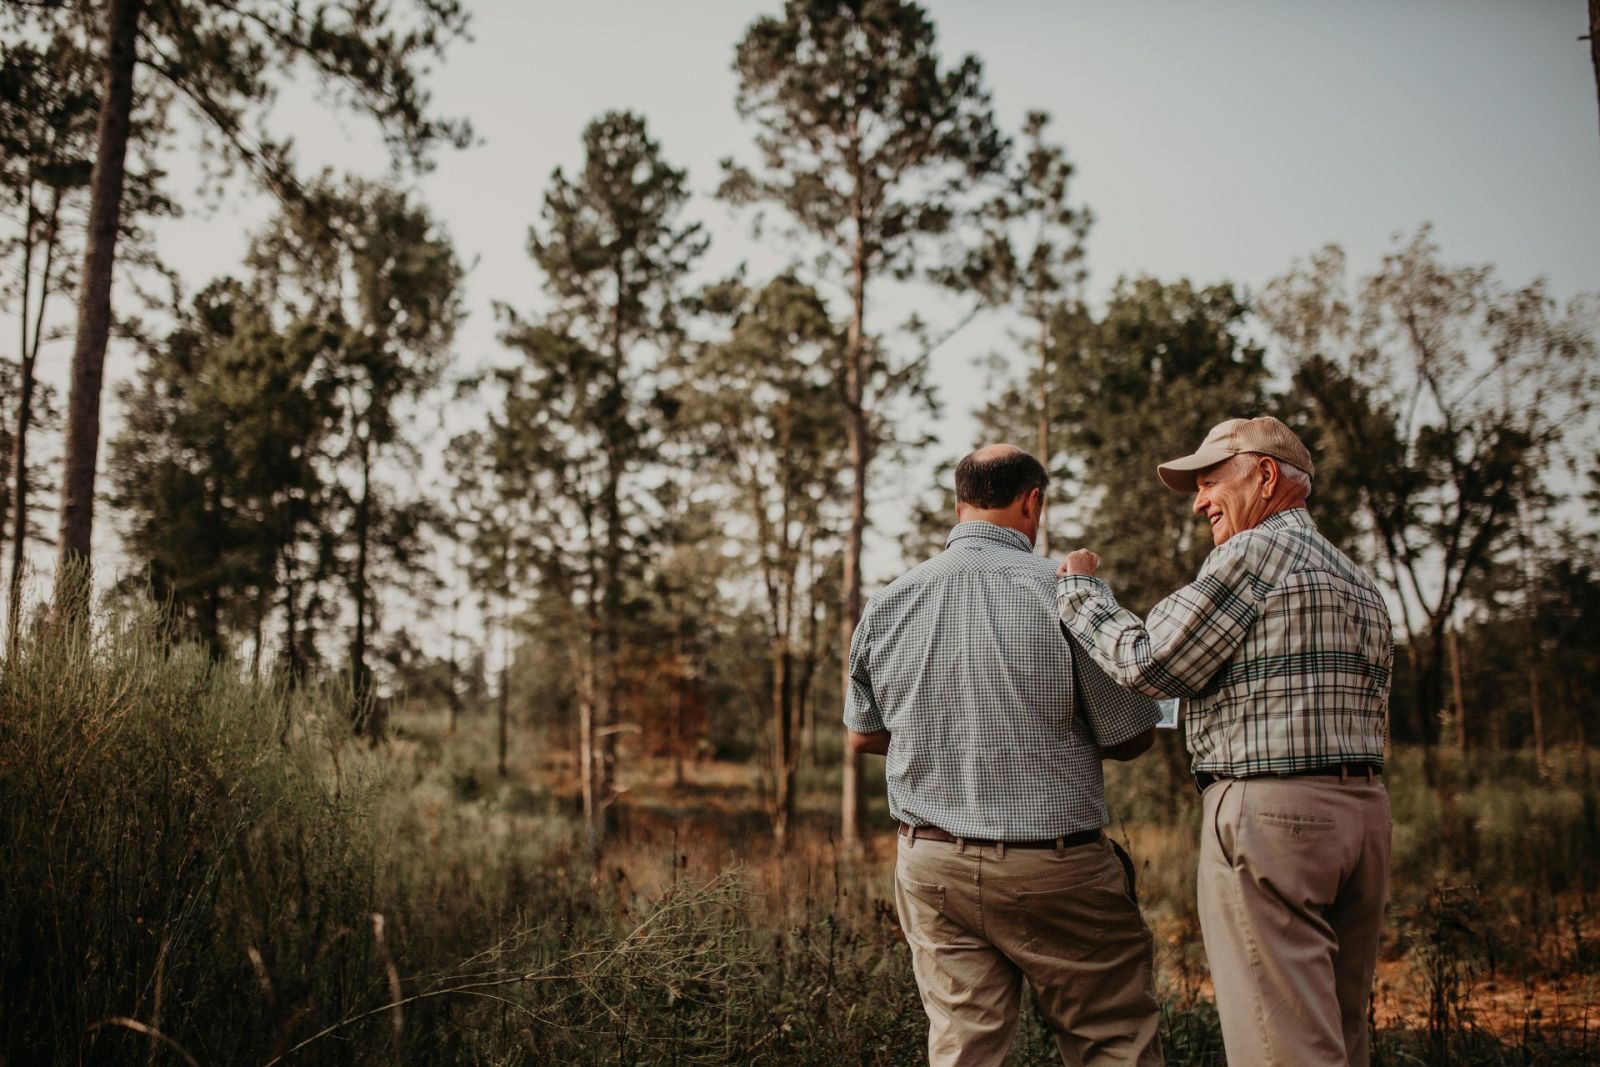 Tom and Tombo Milliken say they have not have a single work-related disagreement in the decade they've worked together. They make sure to have one 'lead dog' on each project they handle. (Photo/Ashley Wright for NAI Columbia)